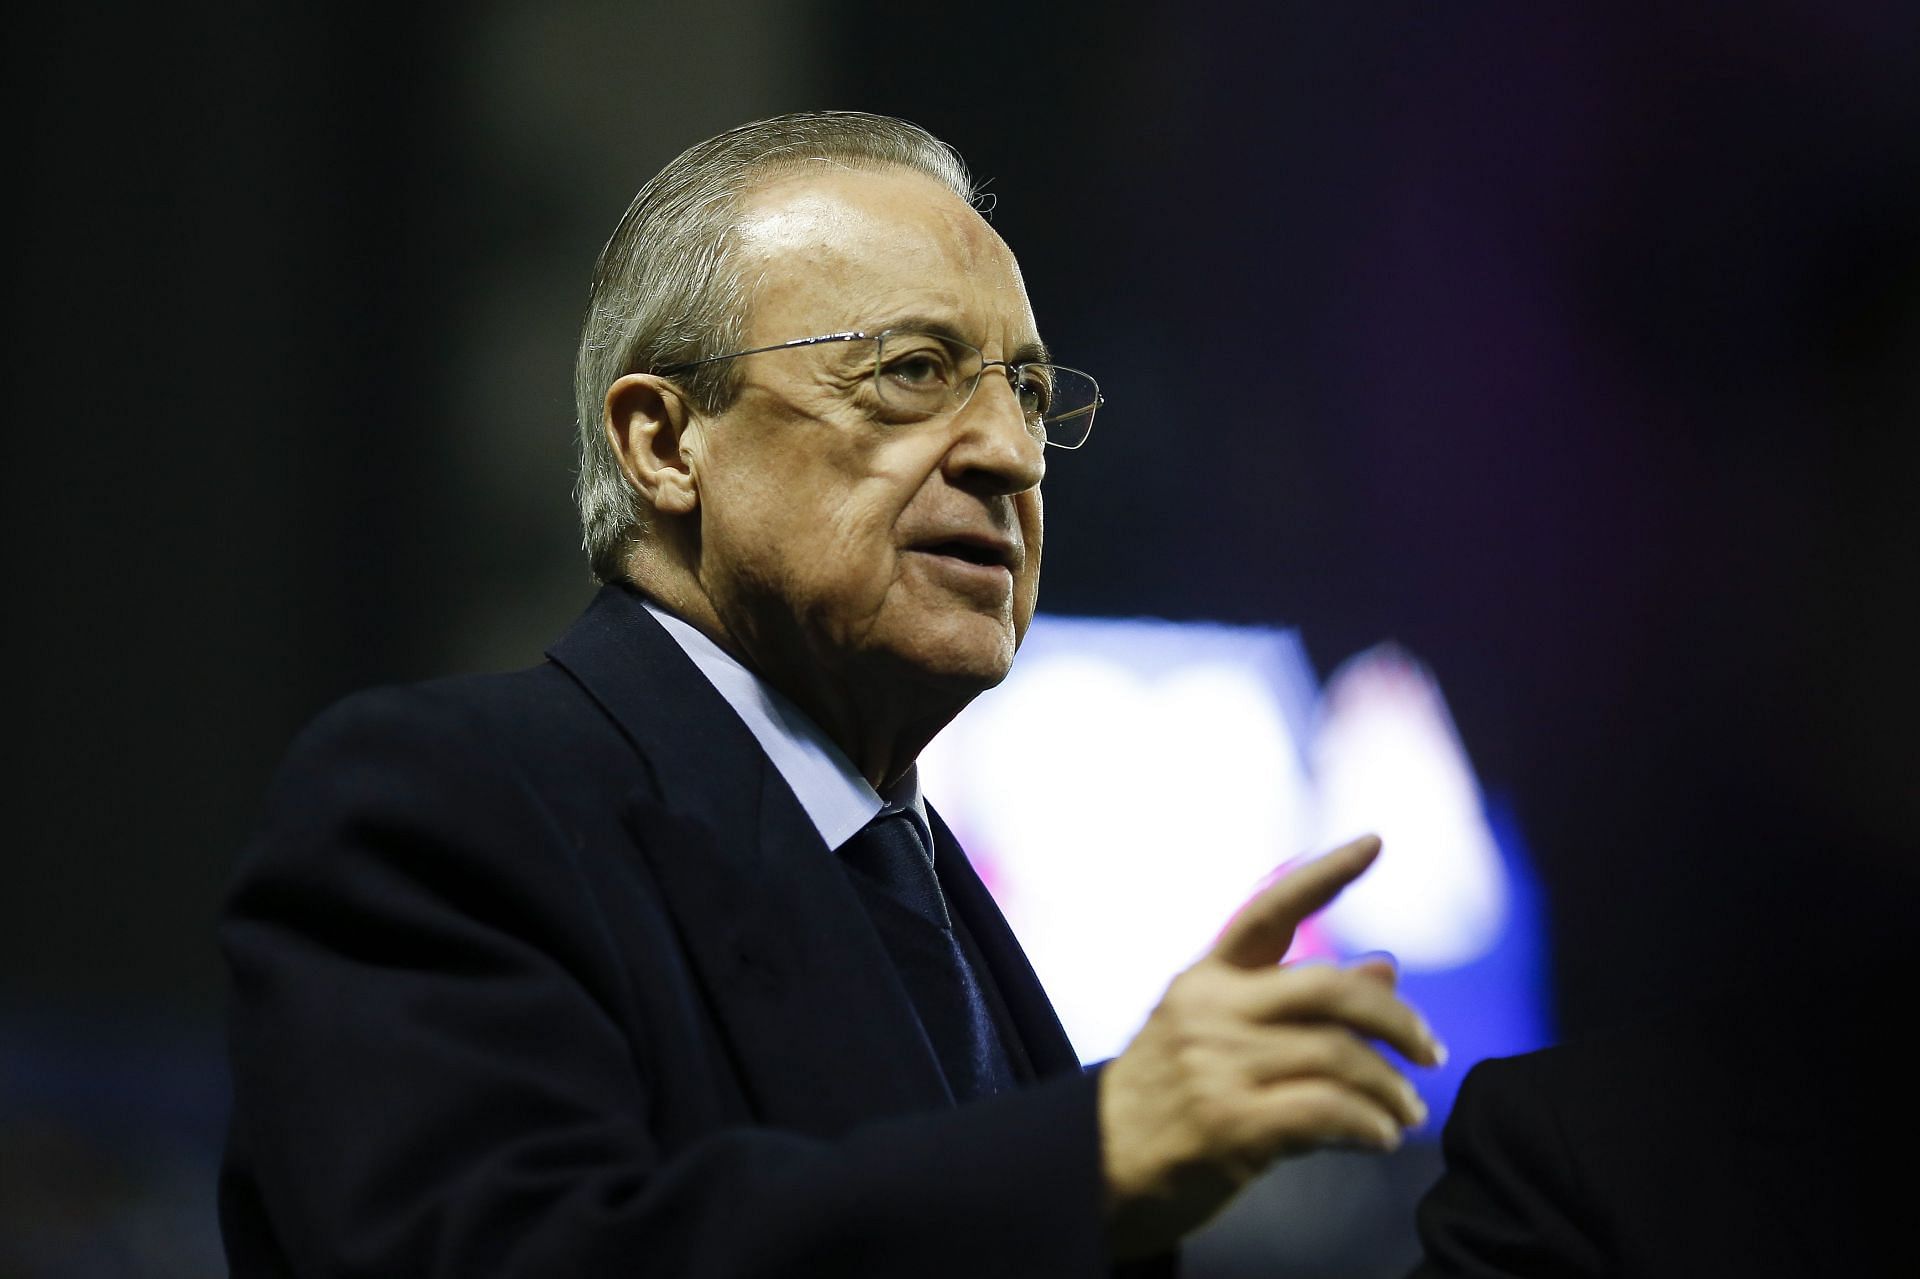 Florentino Perez, the President of Real Madrid was said to be the architect of the ESL